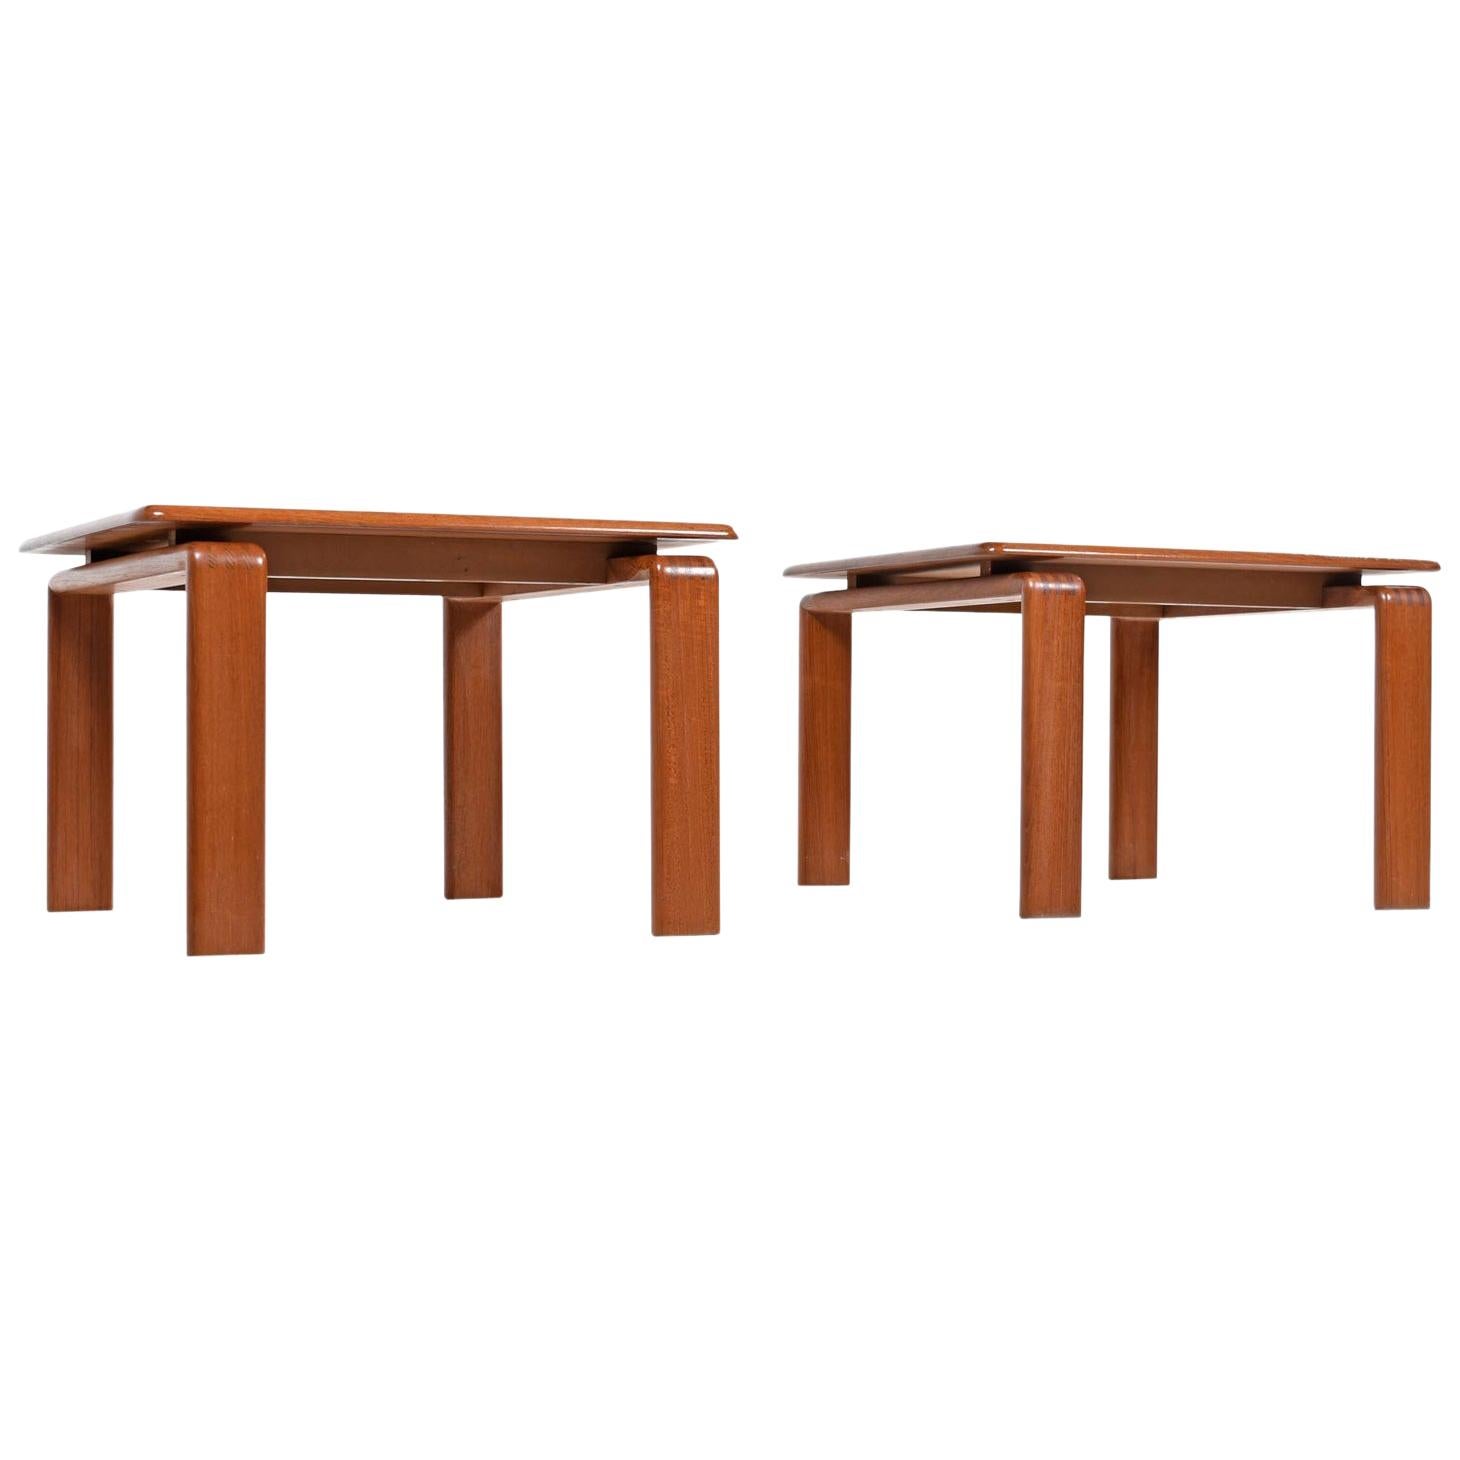 Pair of solid teak vintage Danish modern end tables. Planks of solid teak are laid together to create one slab tabletop. Legs are beautifully contoured solid teak with exposed finger joints at the crook. Tabletop appears to float over the legs